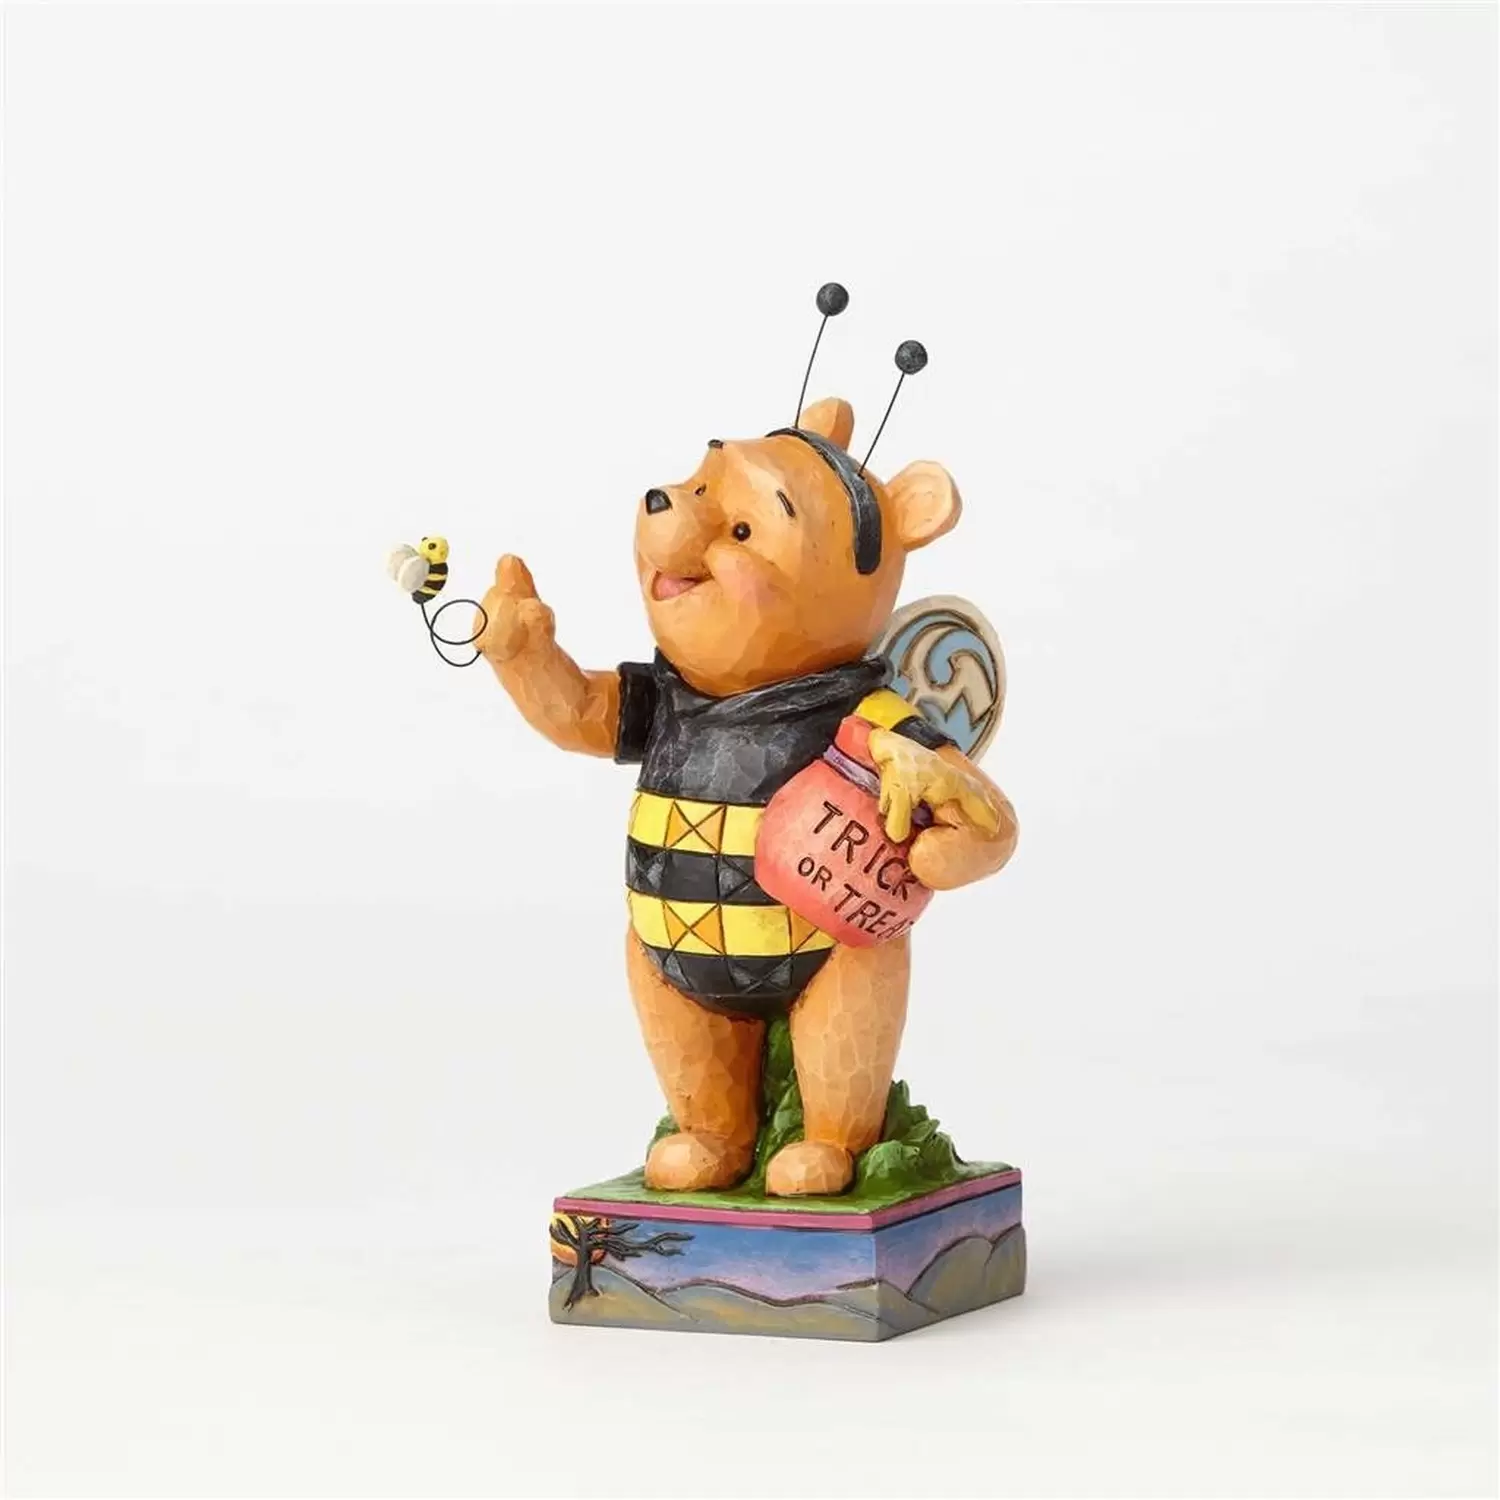 Disney Traditions by Jim Shore - Bumble Pooh - Pooh as a Bee for Halloween